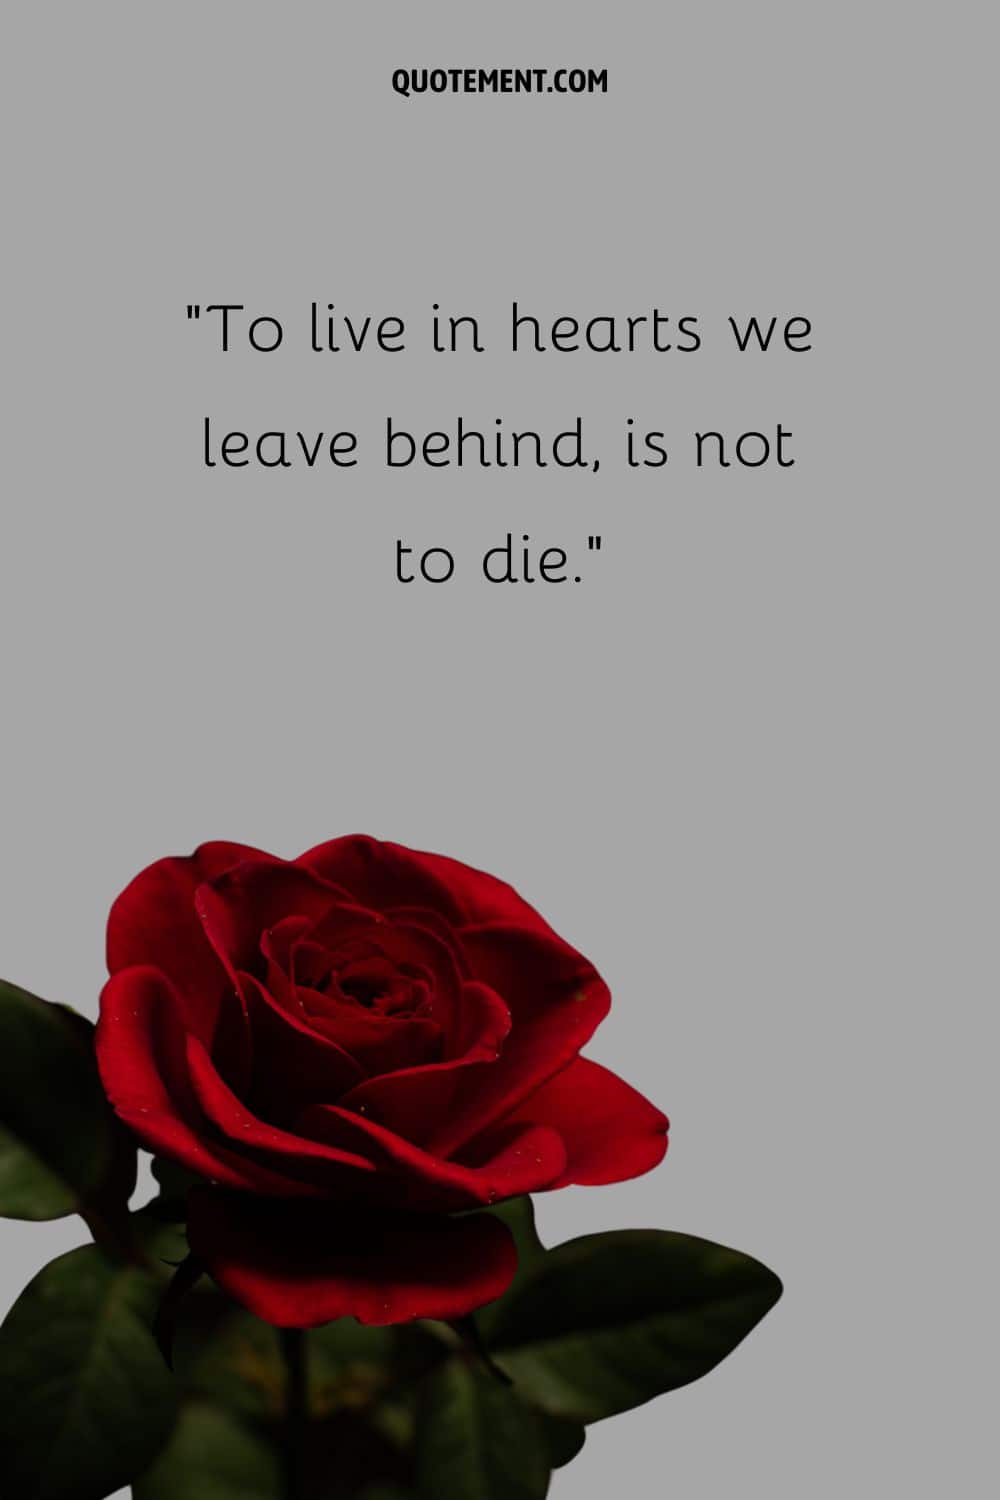 red rose representing a quote about loved ones in heaven.
